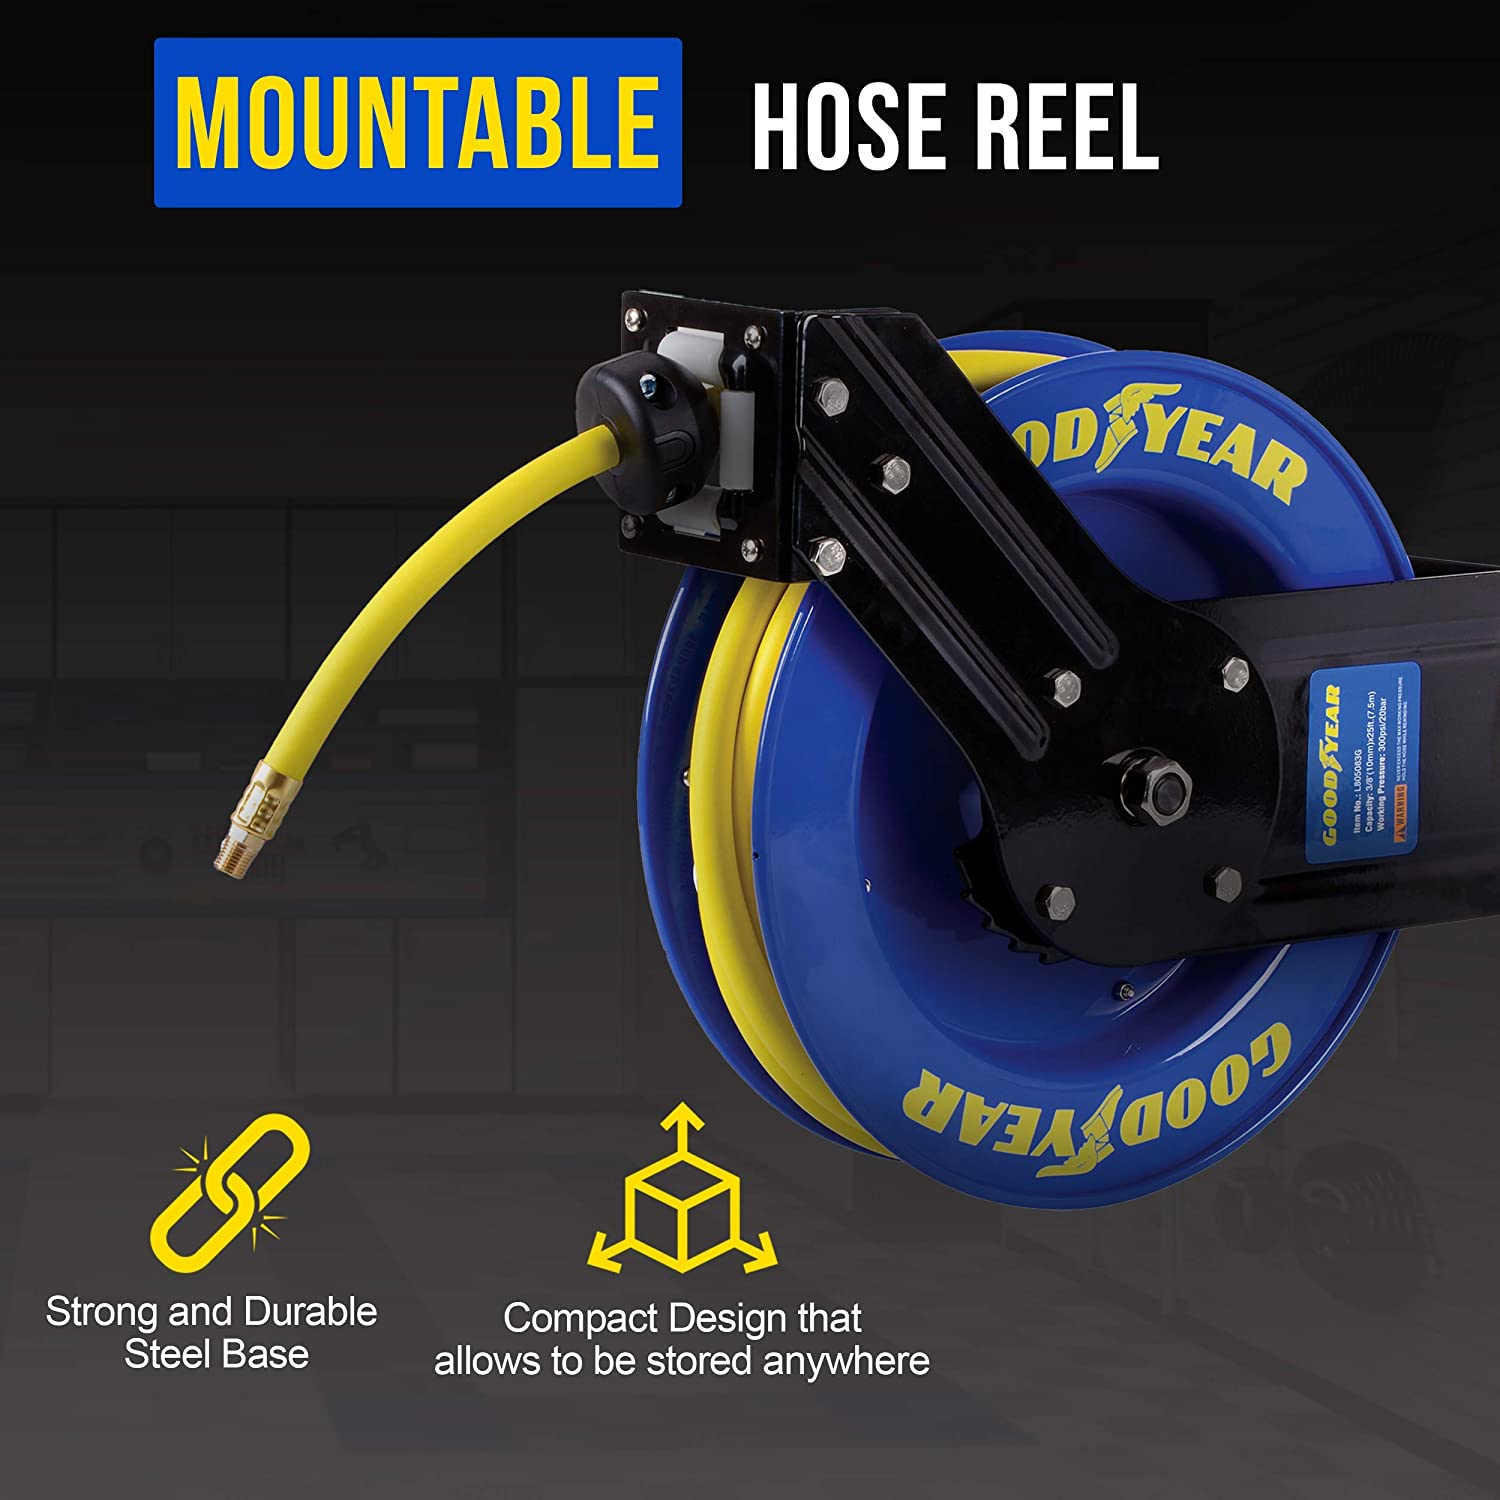 Goodyear Air Hose Reel Retractable 3/8 Inch x 65' Feet Premium Commercial  Flex Hybrid Polymer Hose Max 300 Psi Heavy Duty Spring Driven Polypropylene  Construction w/Lead-in Hose and PVC Handle 